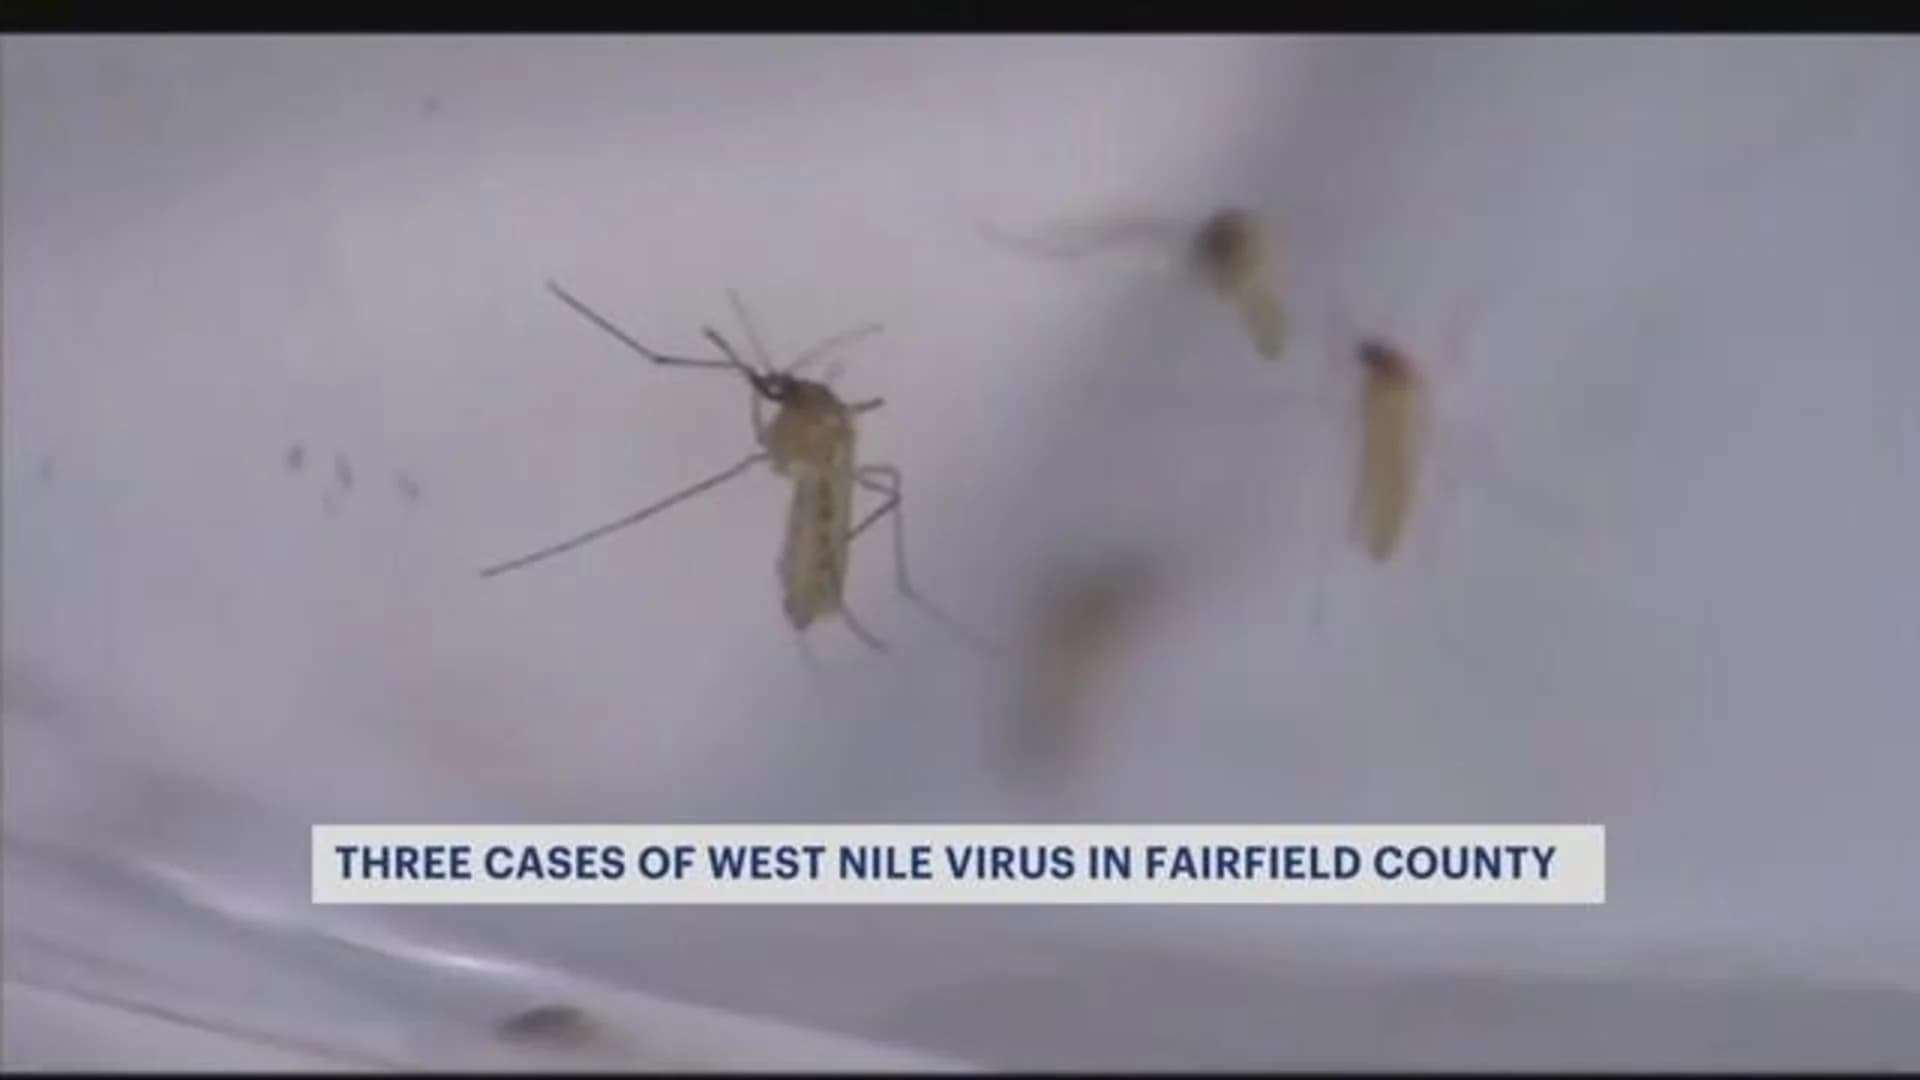 Health officials: 3 cases of West Nile virus reported in Fairfield County